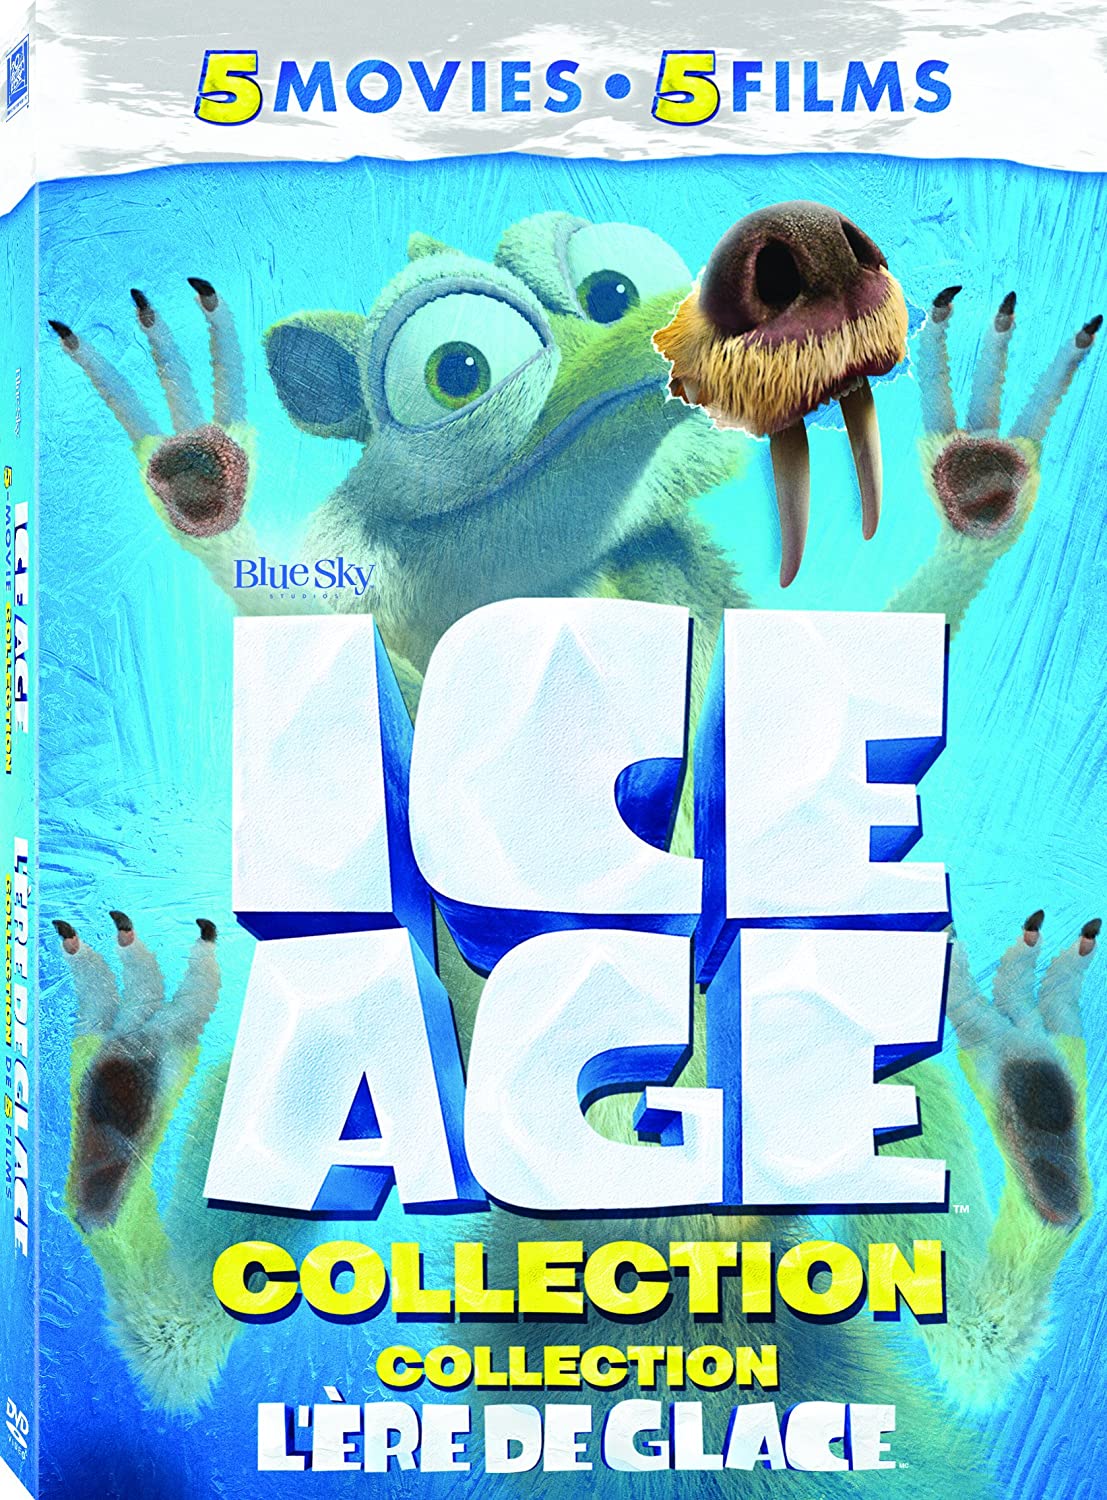 Ice Age 5 Movie Collection (DVD) (20th Century Studios) Your